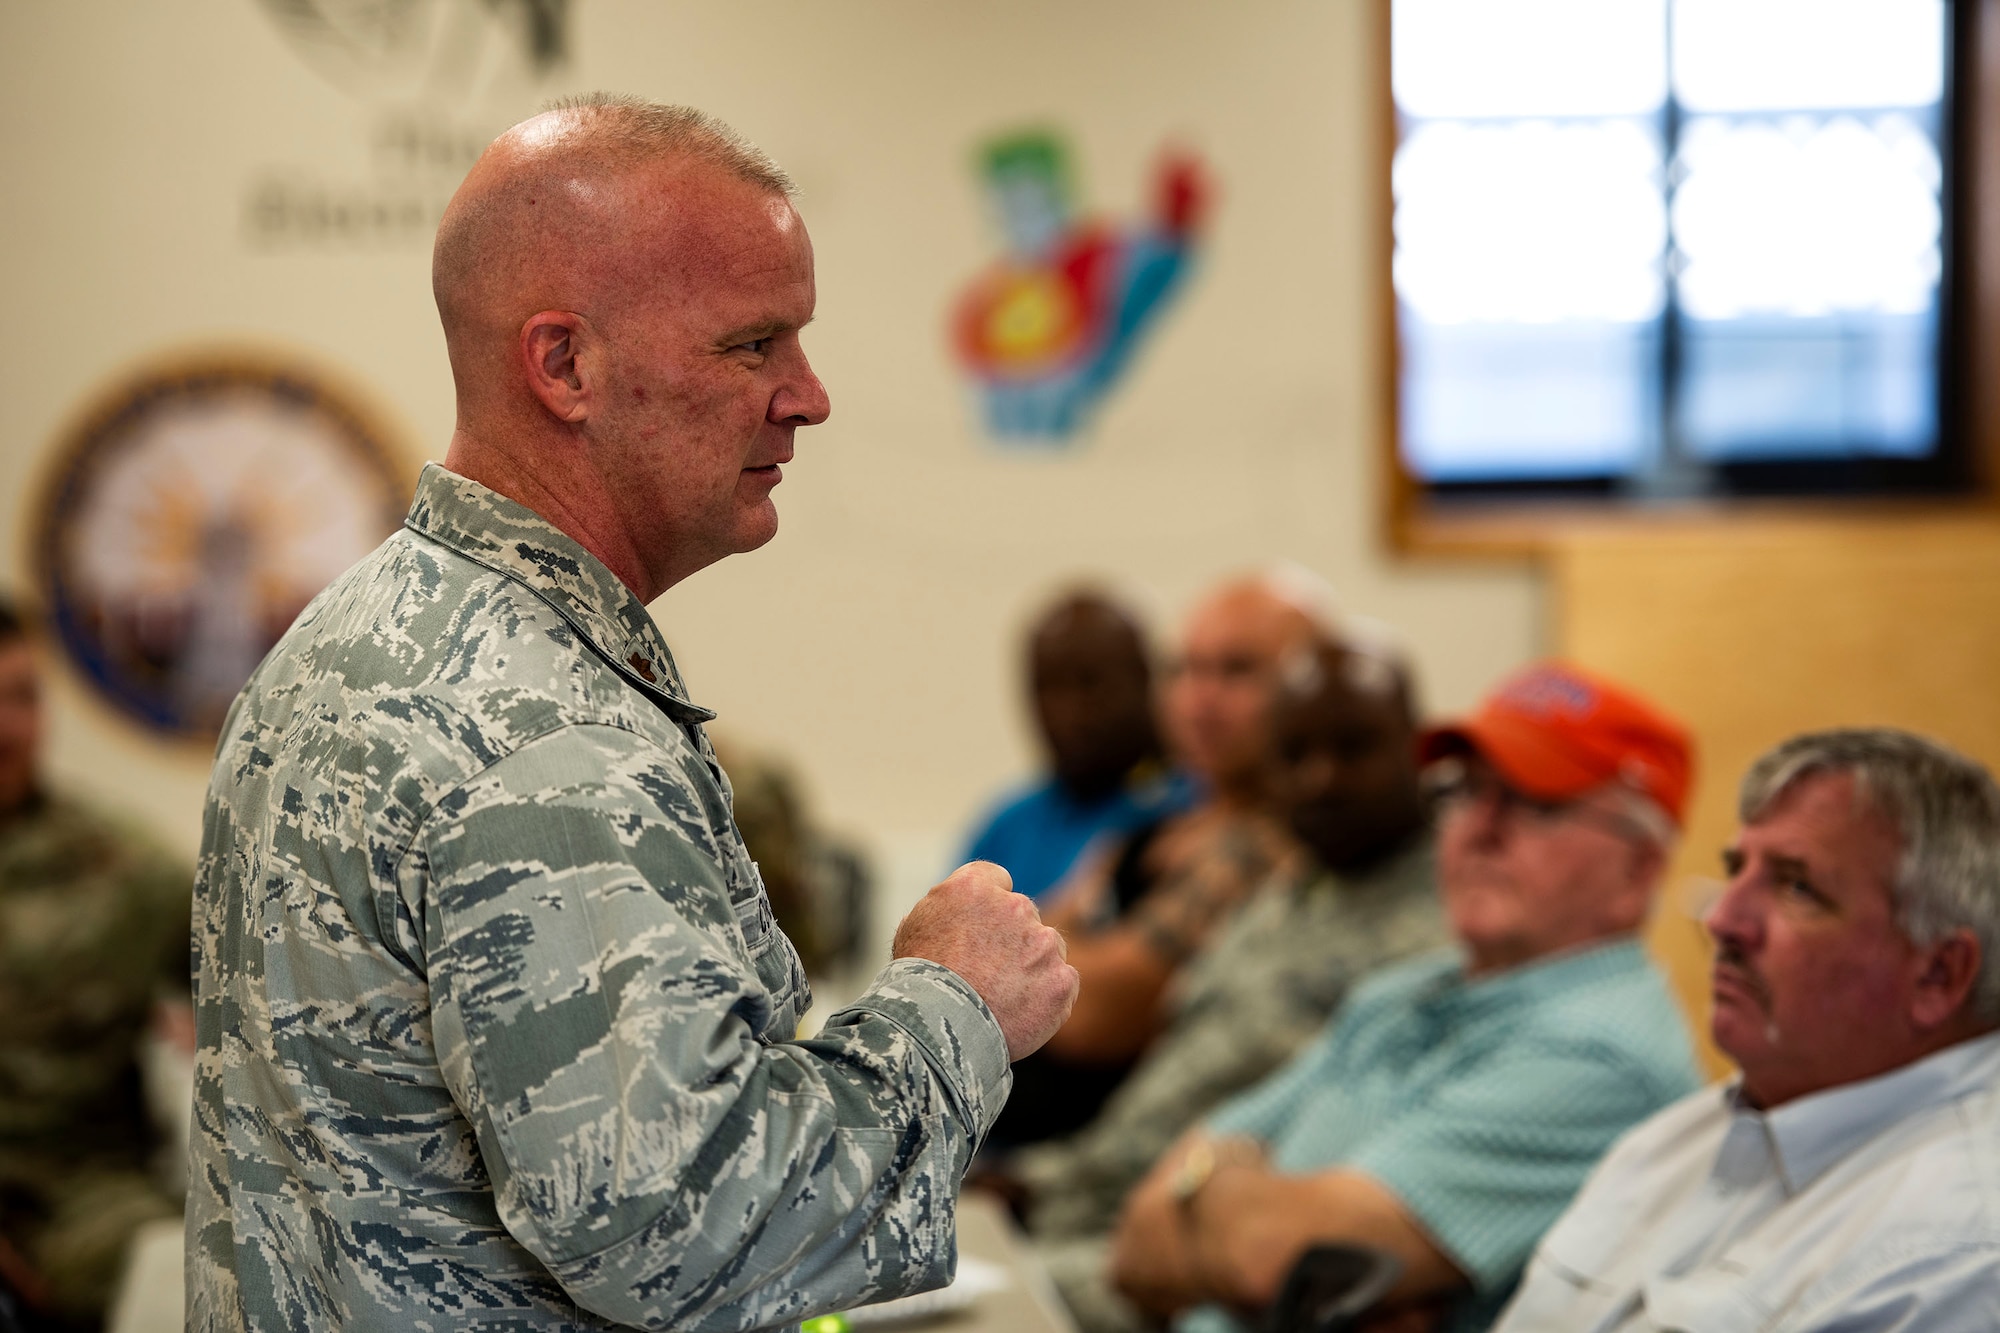 Maj. Steven Cuneio, 23d Wing chaplain, speaks to Airmen from the 23d Civil Engineer Squadron during resiliency training Sept. 10, 2019, at Moody Air Force Base, Ga. The event was hosted by Cuneio, and served as an interactive experience for Airmen, providing practical approaches they can use regularly to improve the resiliency culture in their squadrons. (U.S. Air Force photo by Senior Airman Erick Requadt)